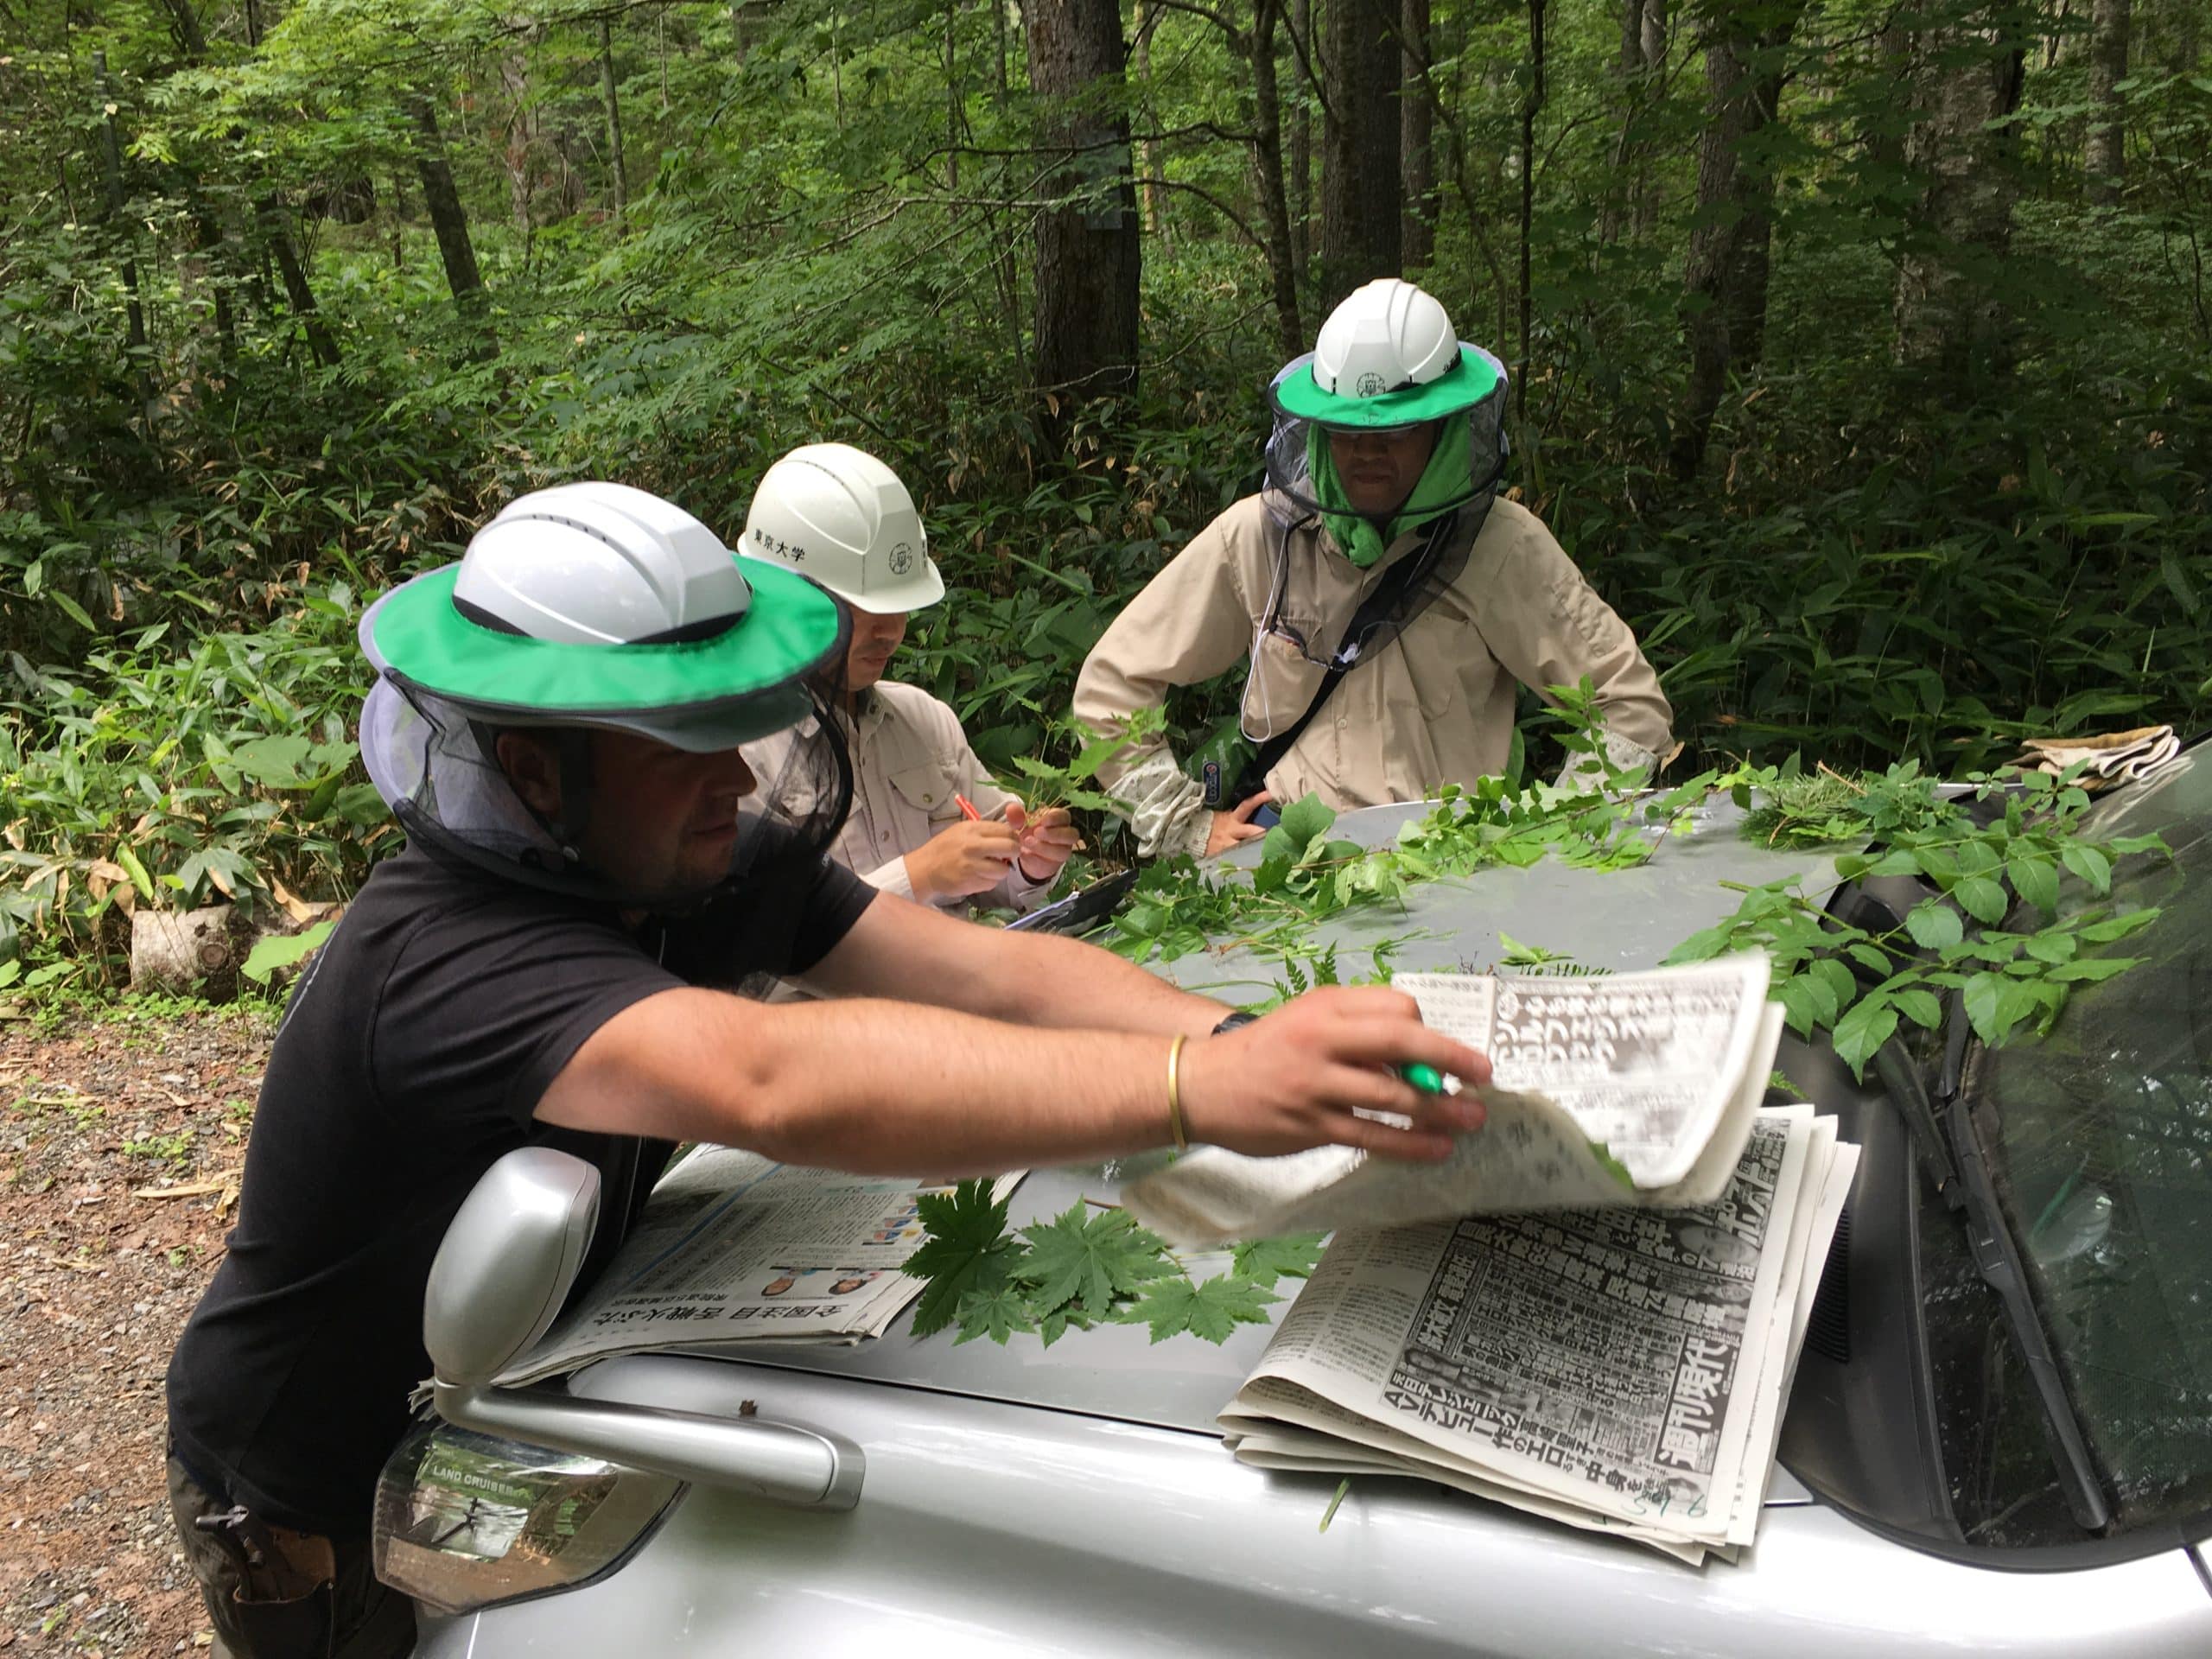 Three people in protective gear examine plant samples on the hood of a car